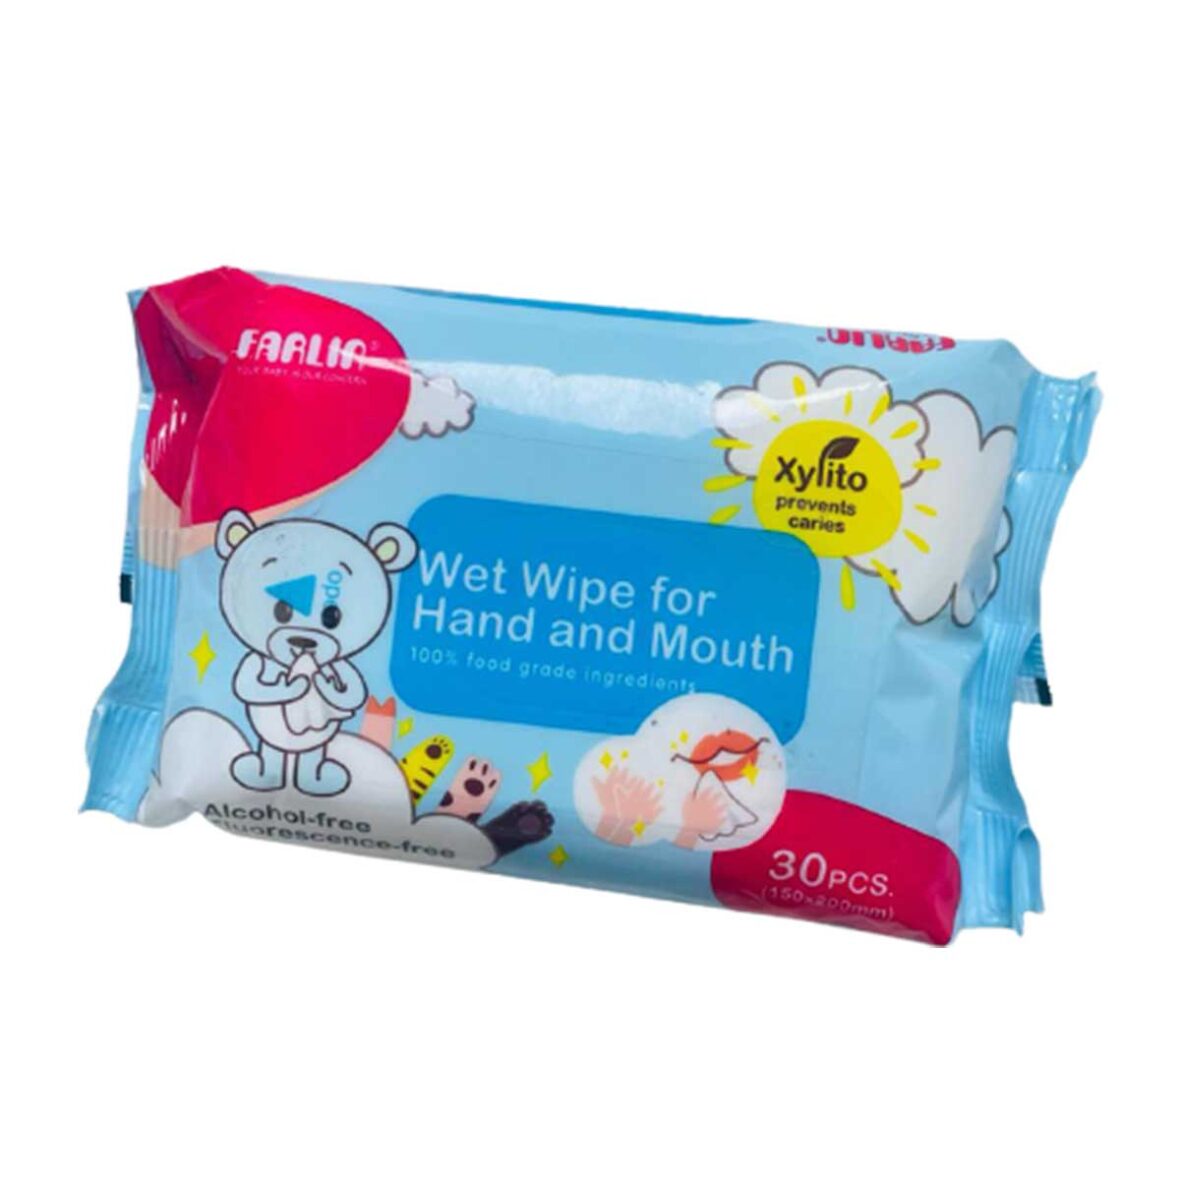 Farlin Wet Wipe for Hand and Mouth